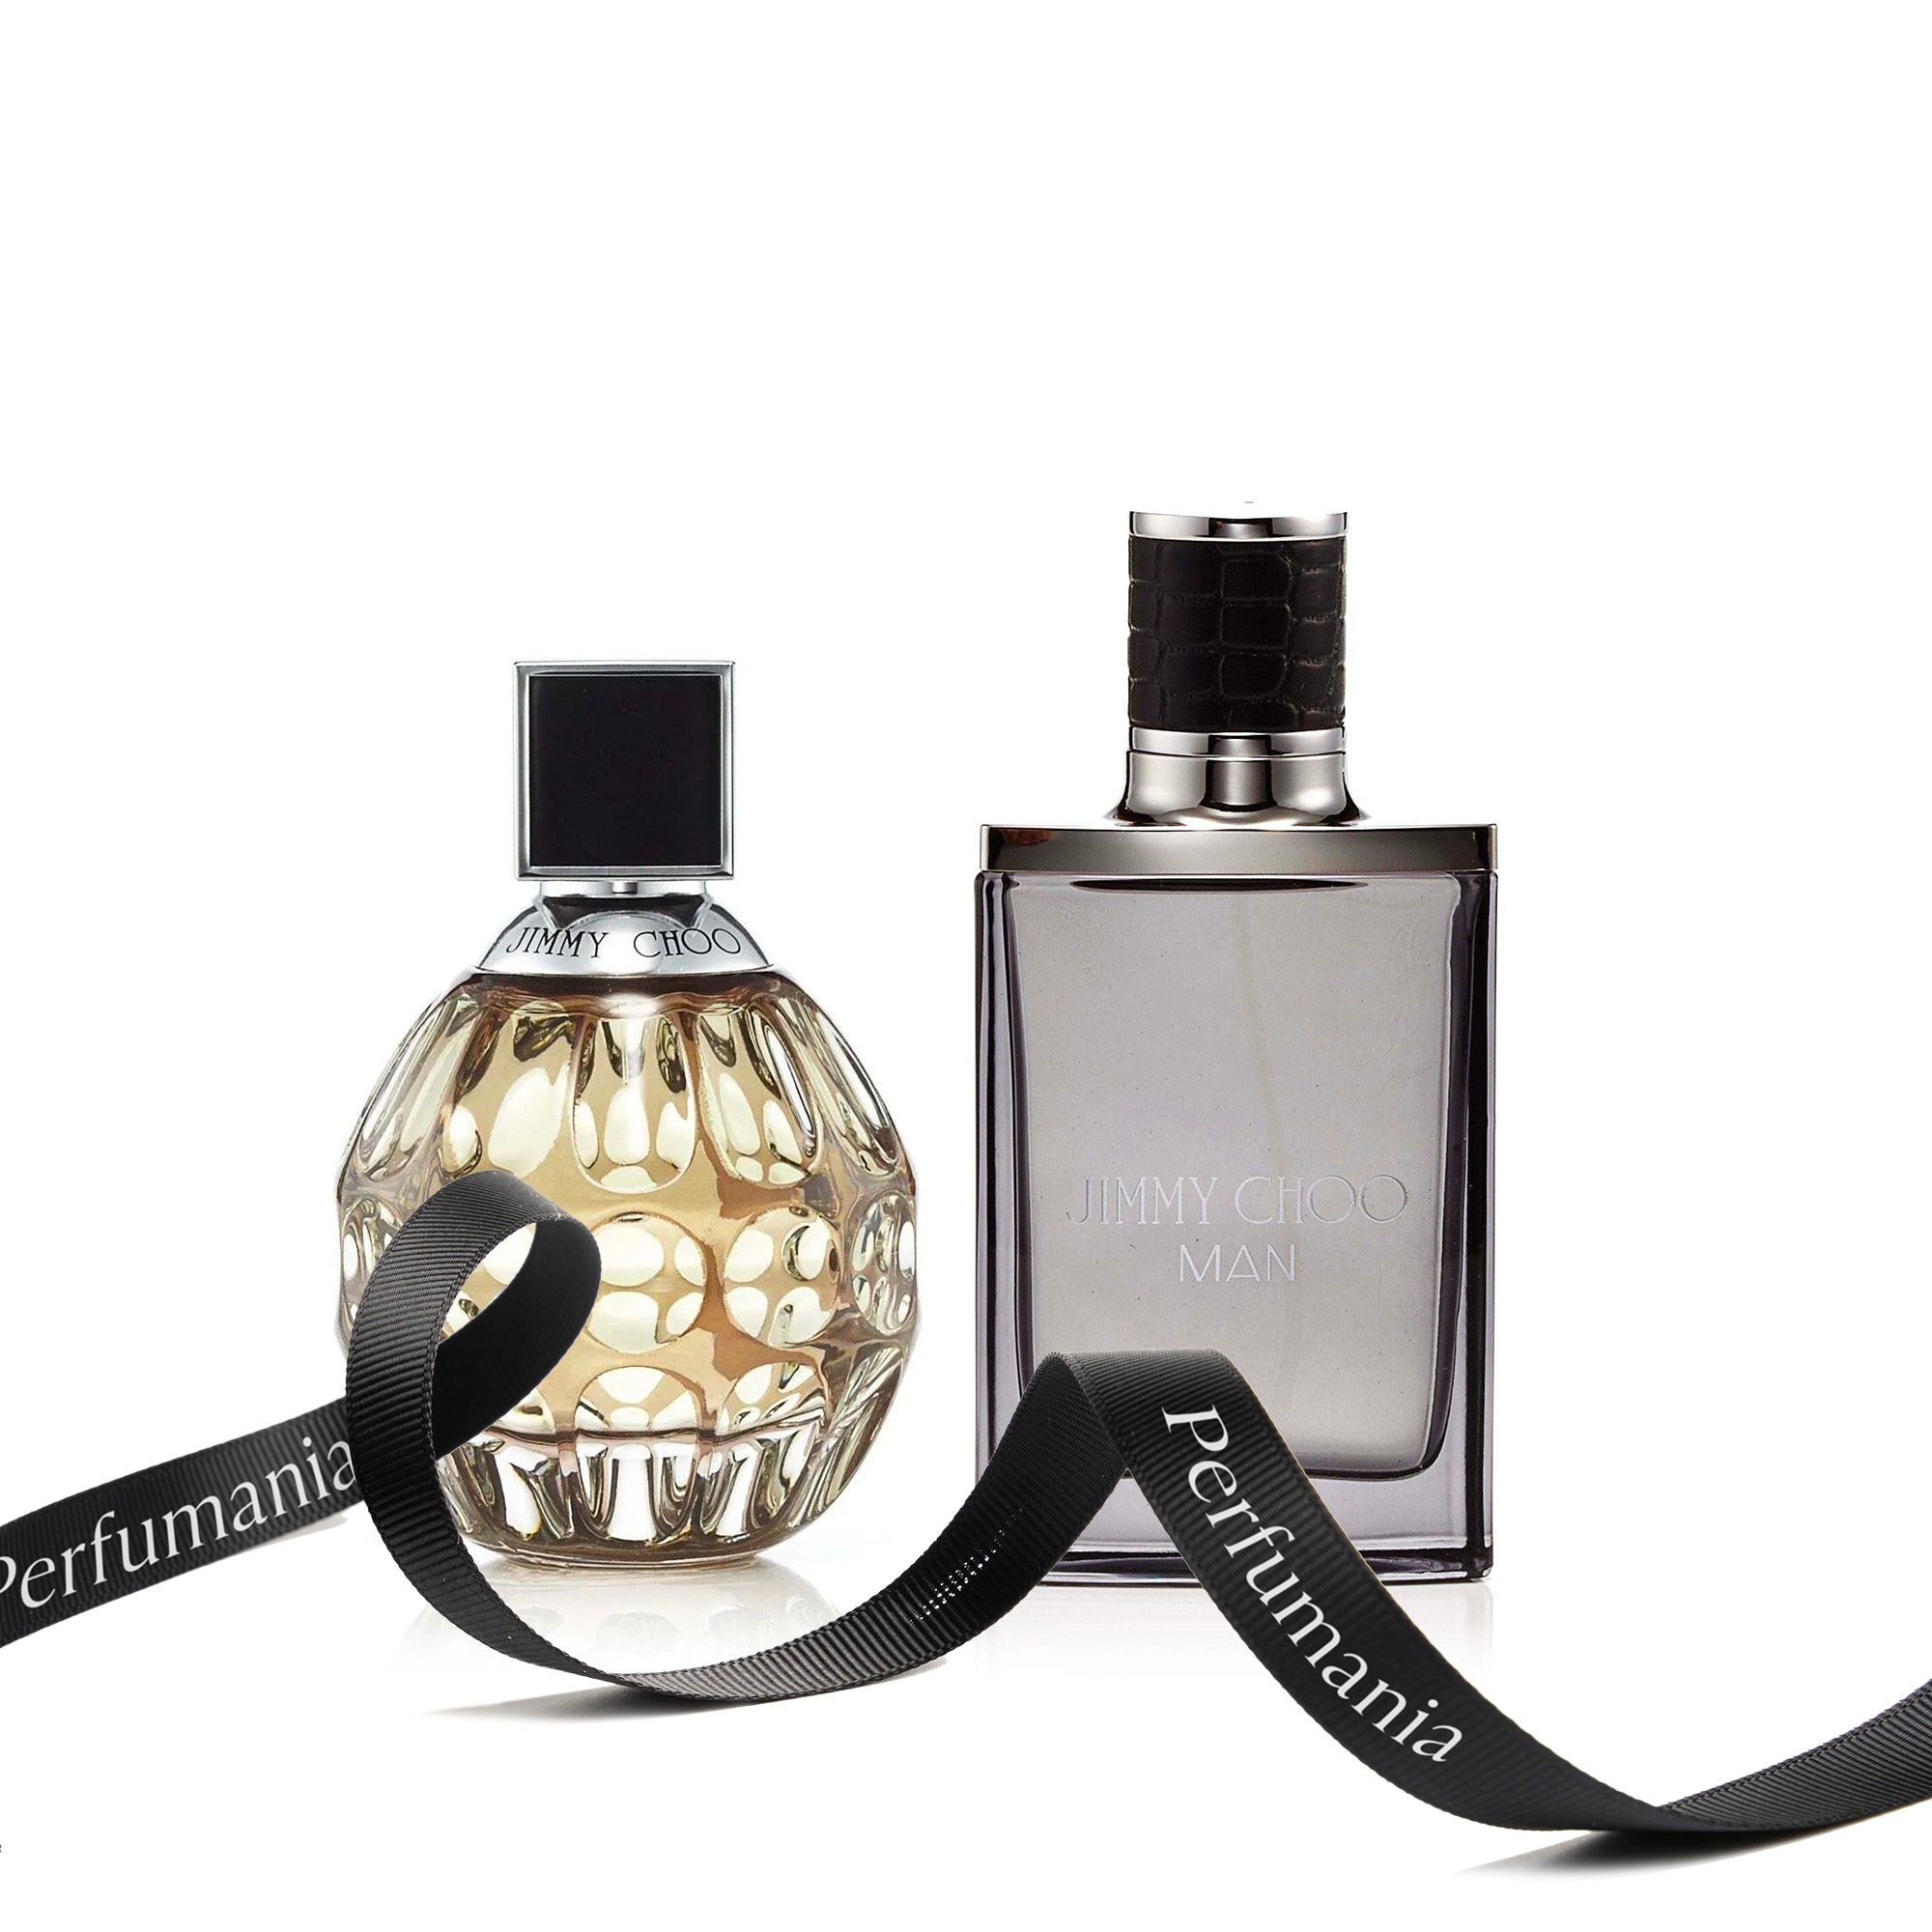 Bundle Deal His & Hers: Jimmy Choo by Jimmy Choo for Men and Women Featured image